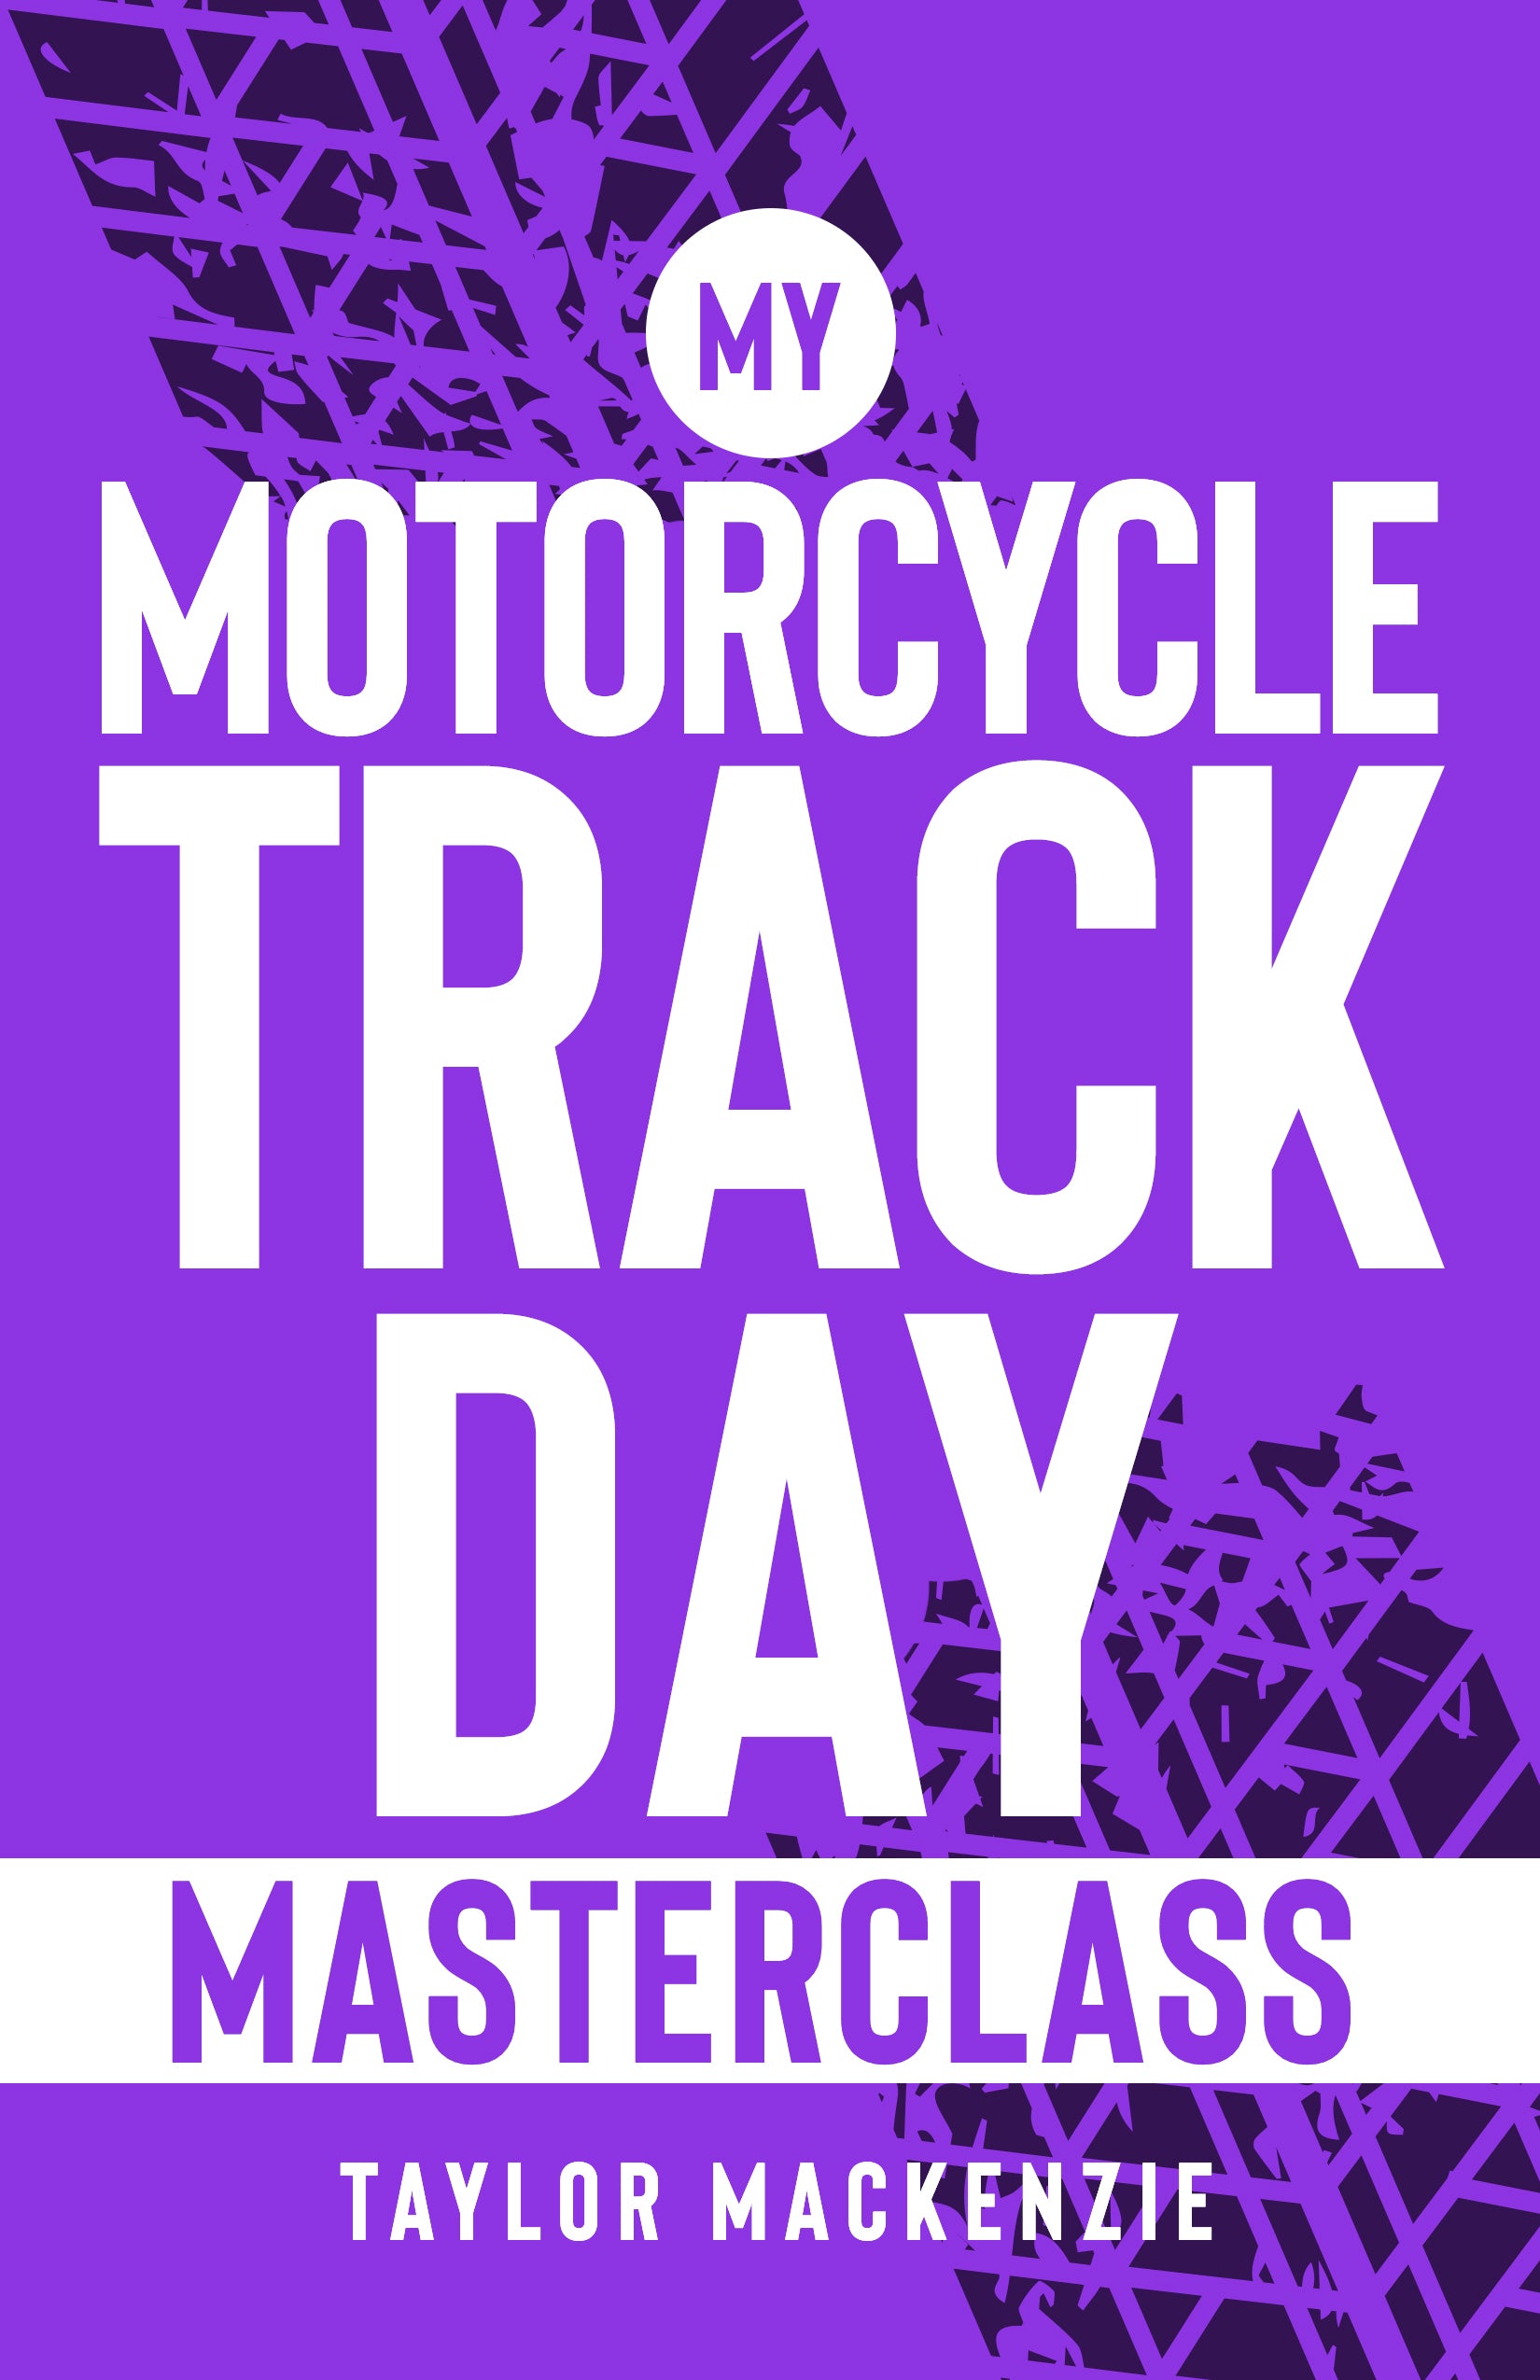 Motorcycle Track Day Masterclass